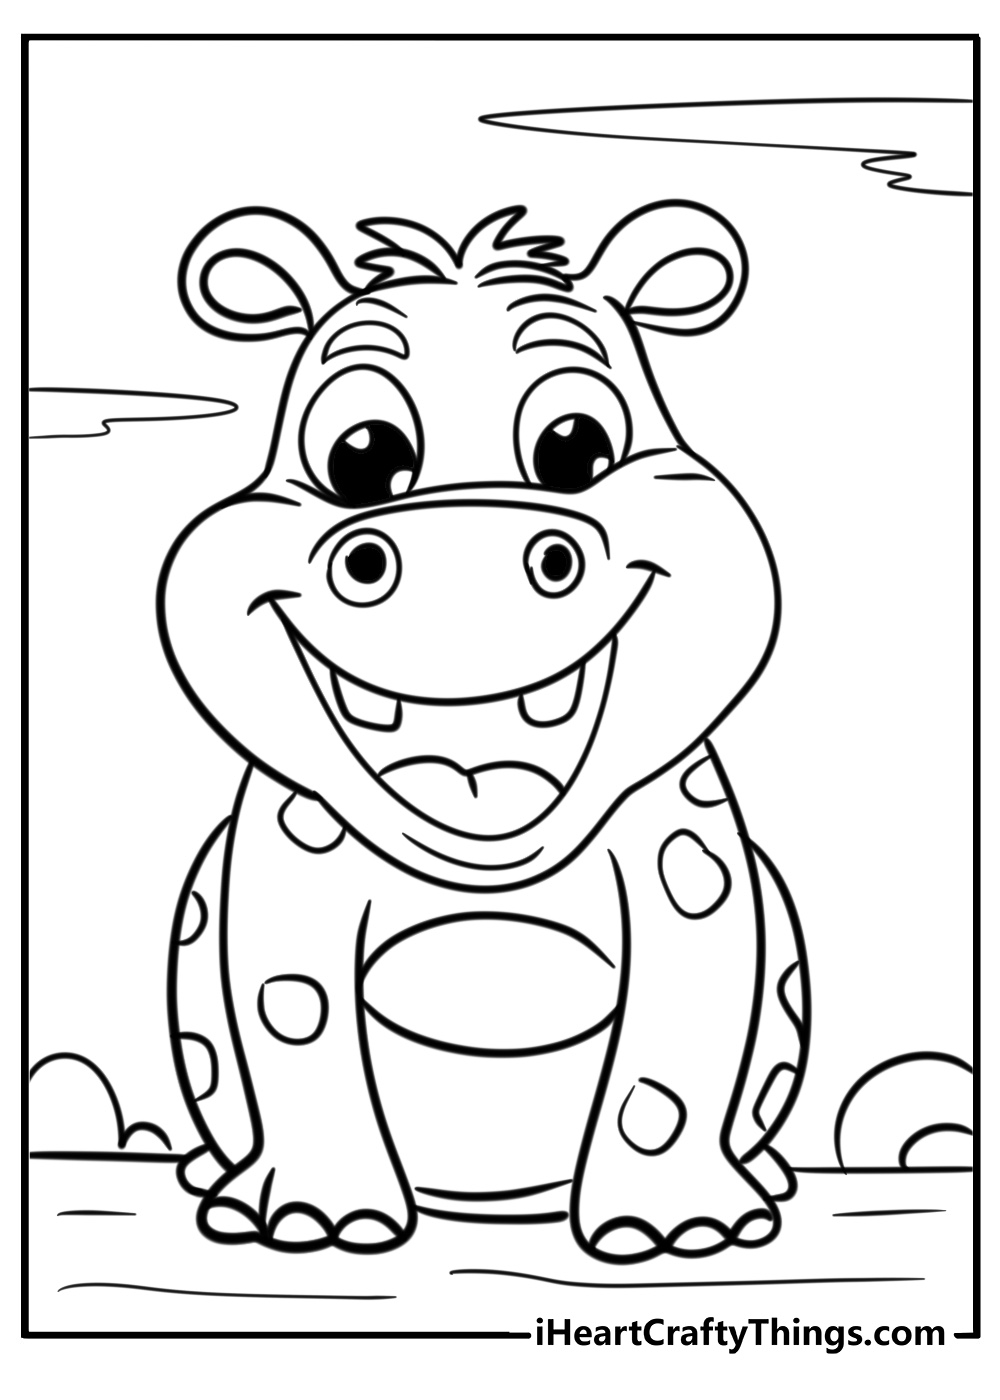 Cute animals coloring page of sitting hippopotamus with big smile